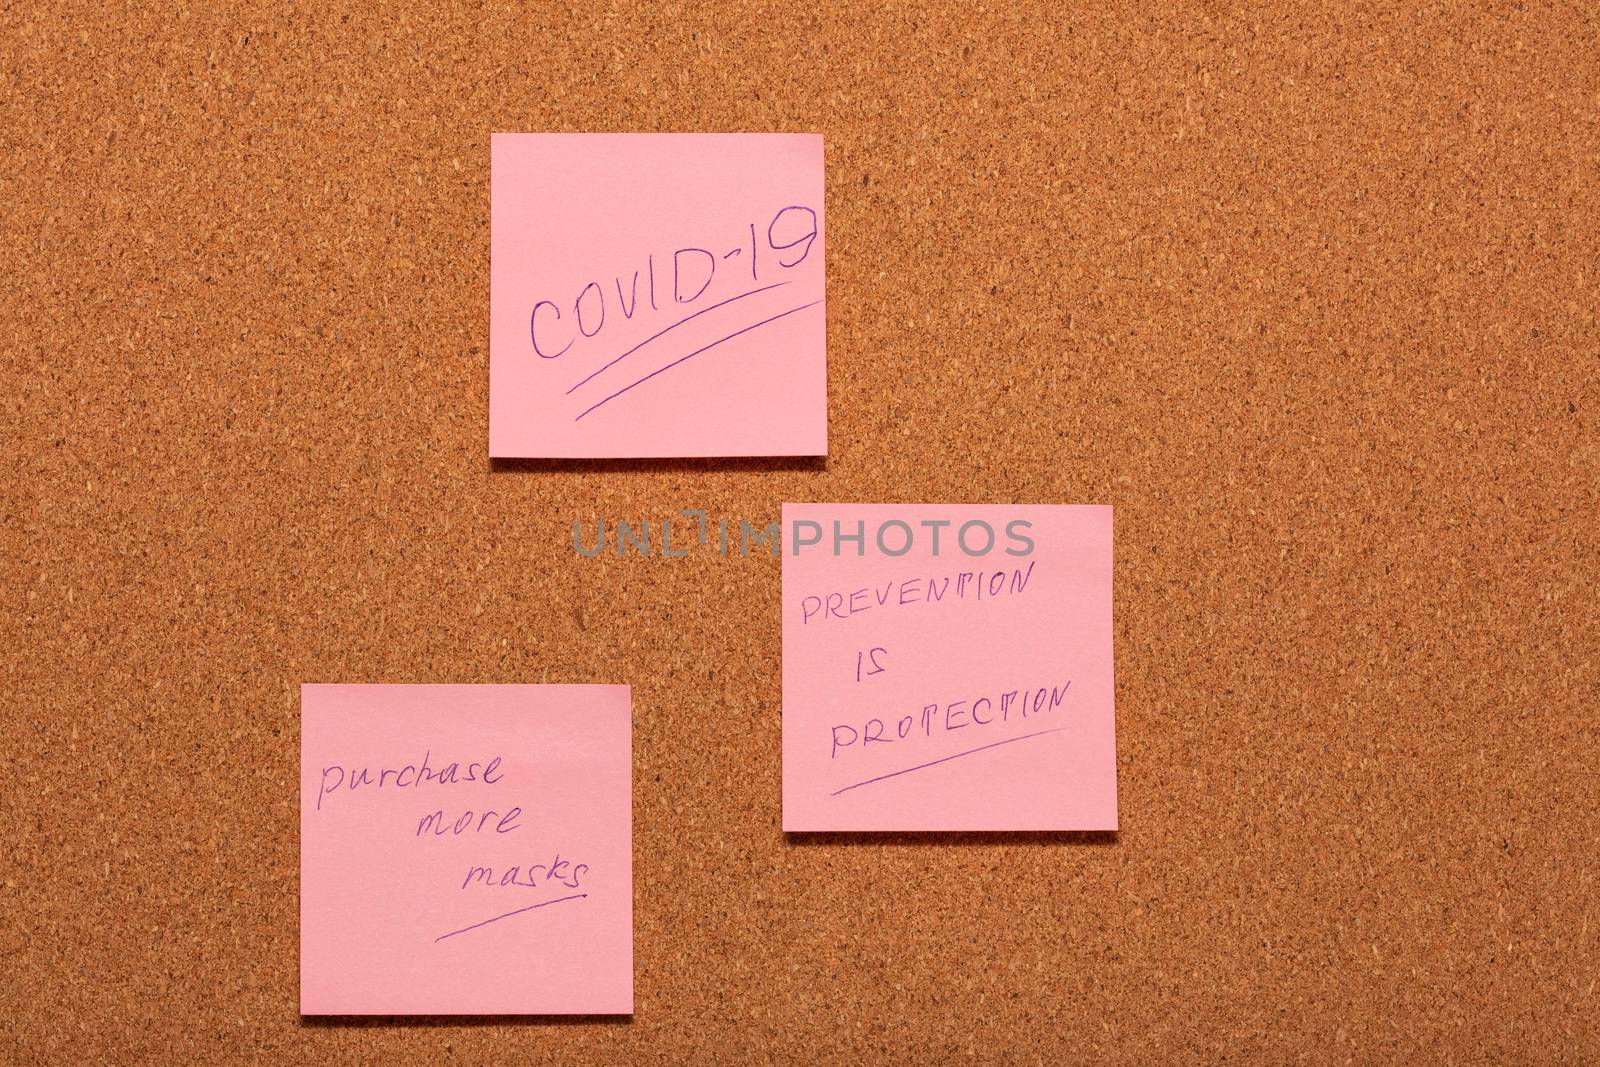 Covid-19, Prevention is Protection, and reminder to purchase more masks handwritten on three pink stickers on a cork notice-board. Healthcare and social concepts.